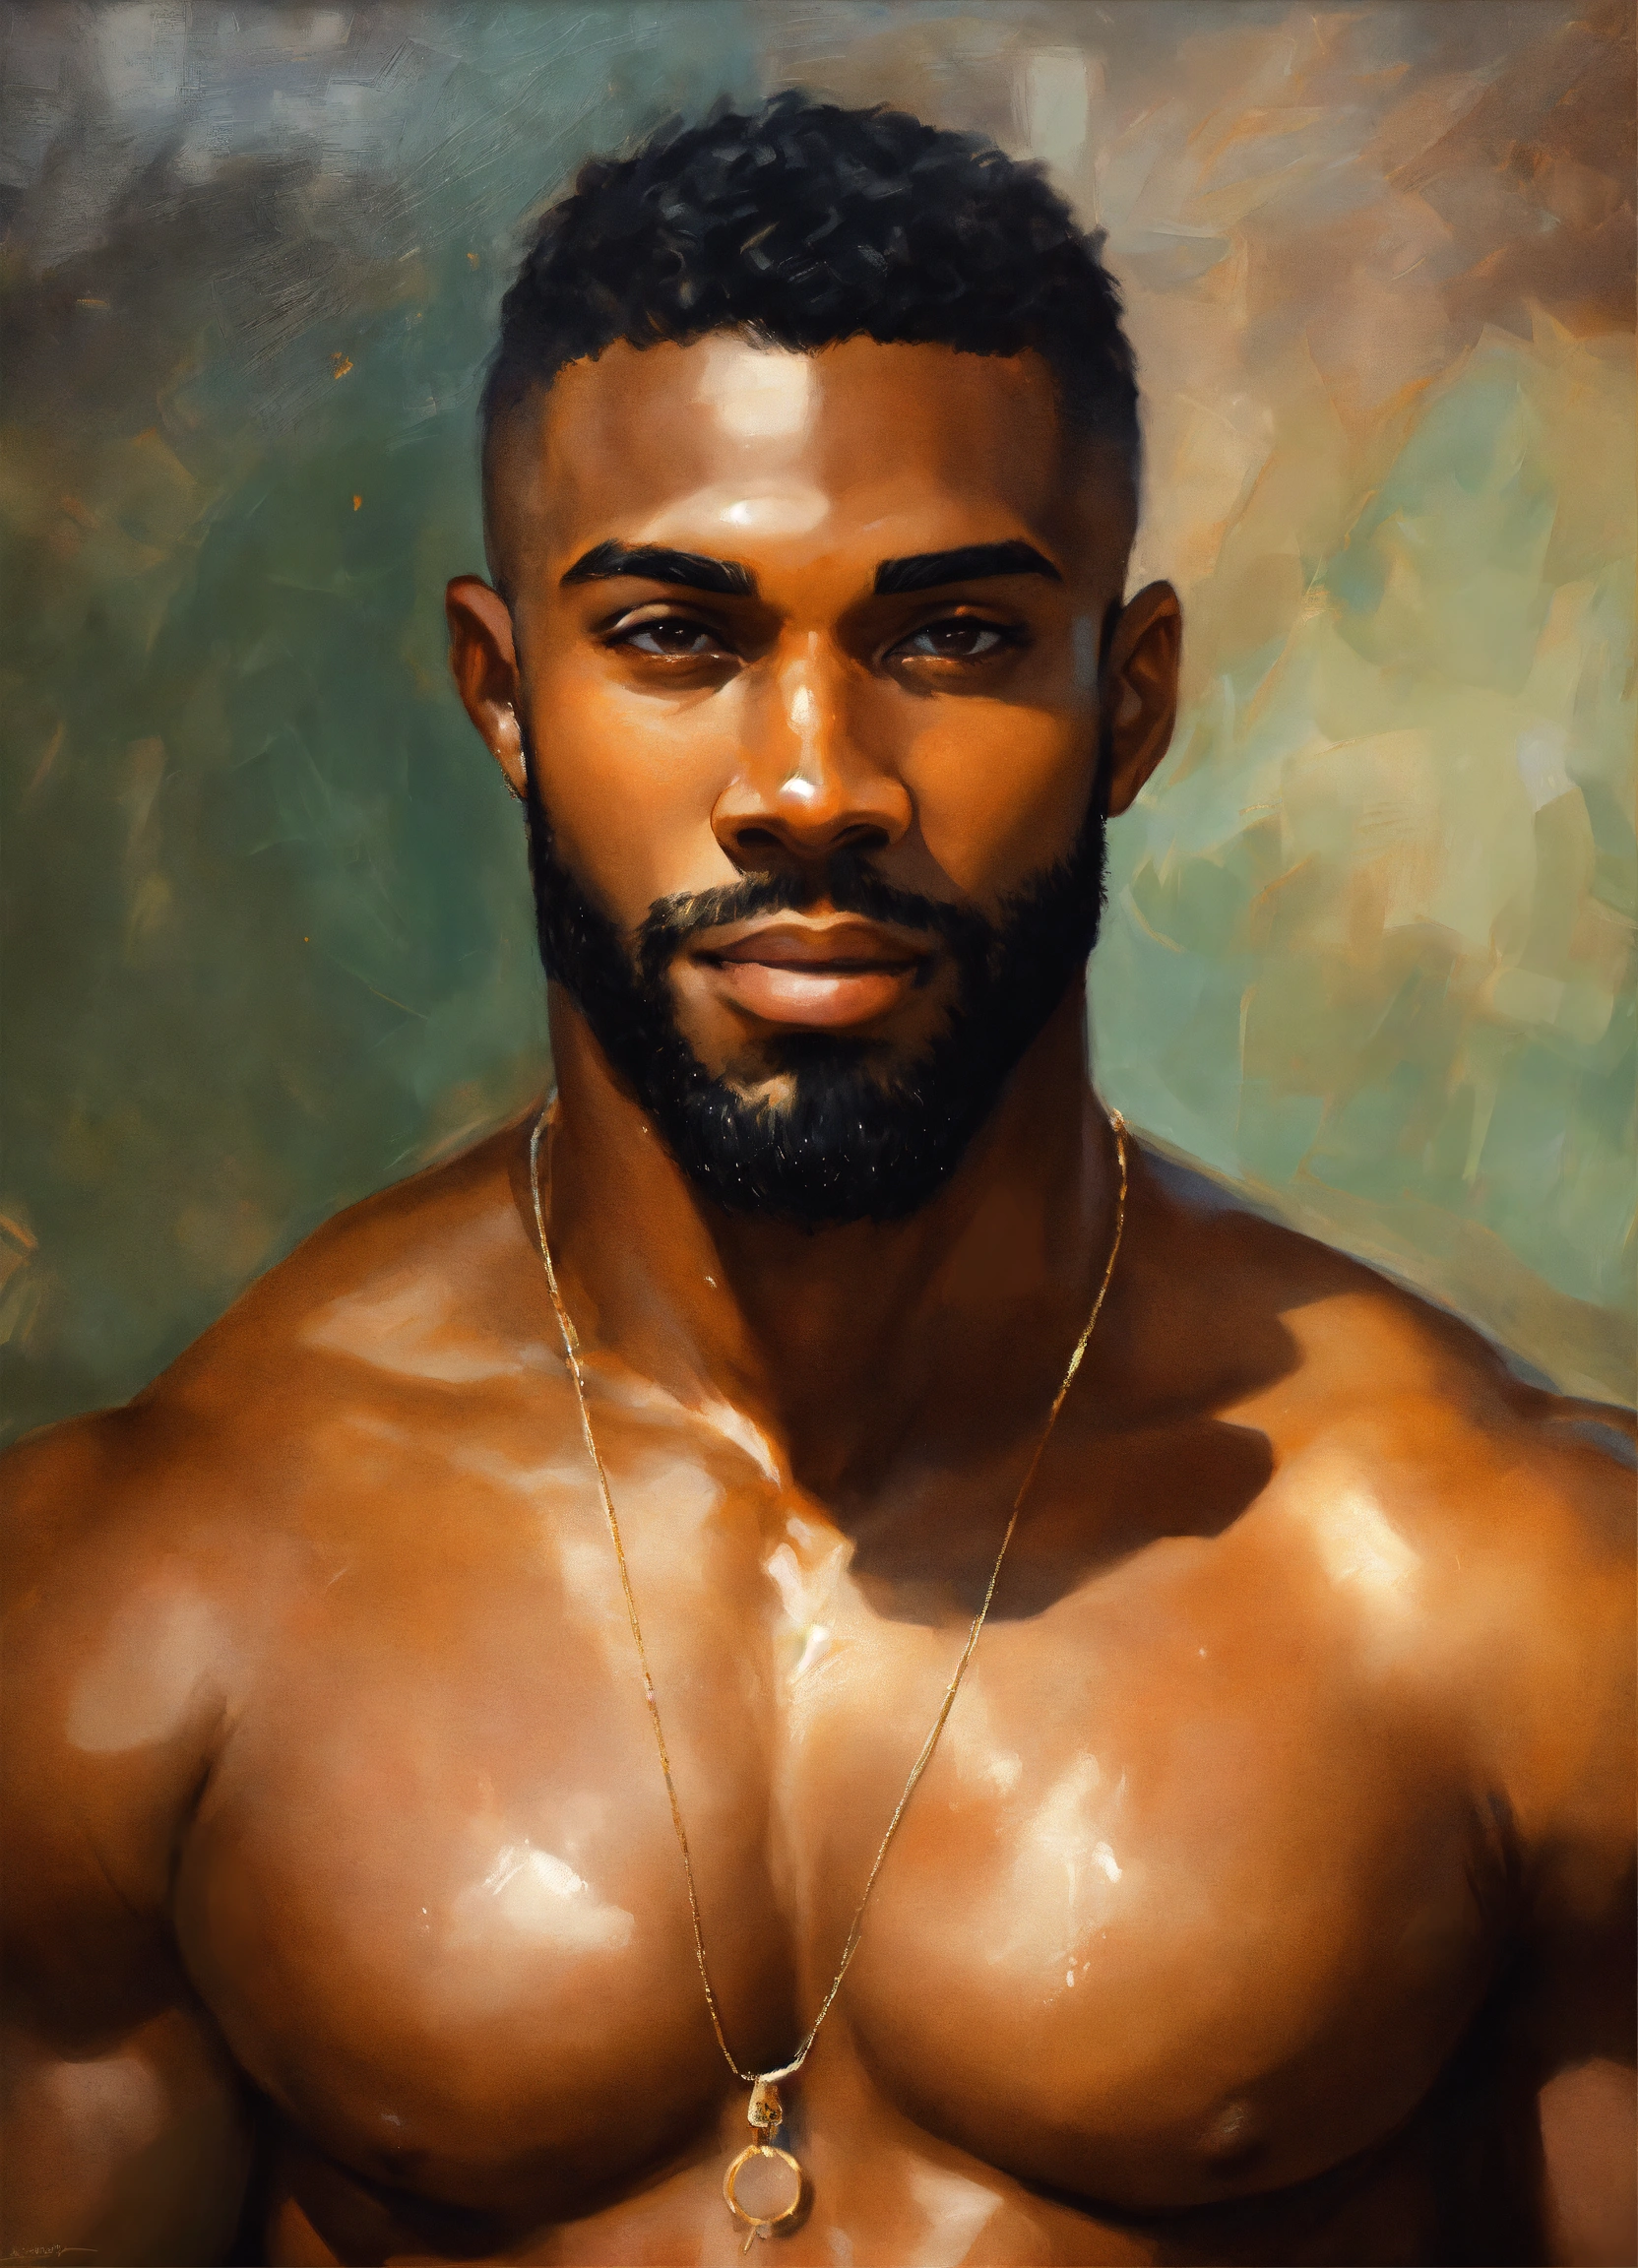 Lexica Handsome 26 Year Old Black Man Flawless Brown Skin Big Pecs Six Pack Abs Big 3499